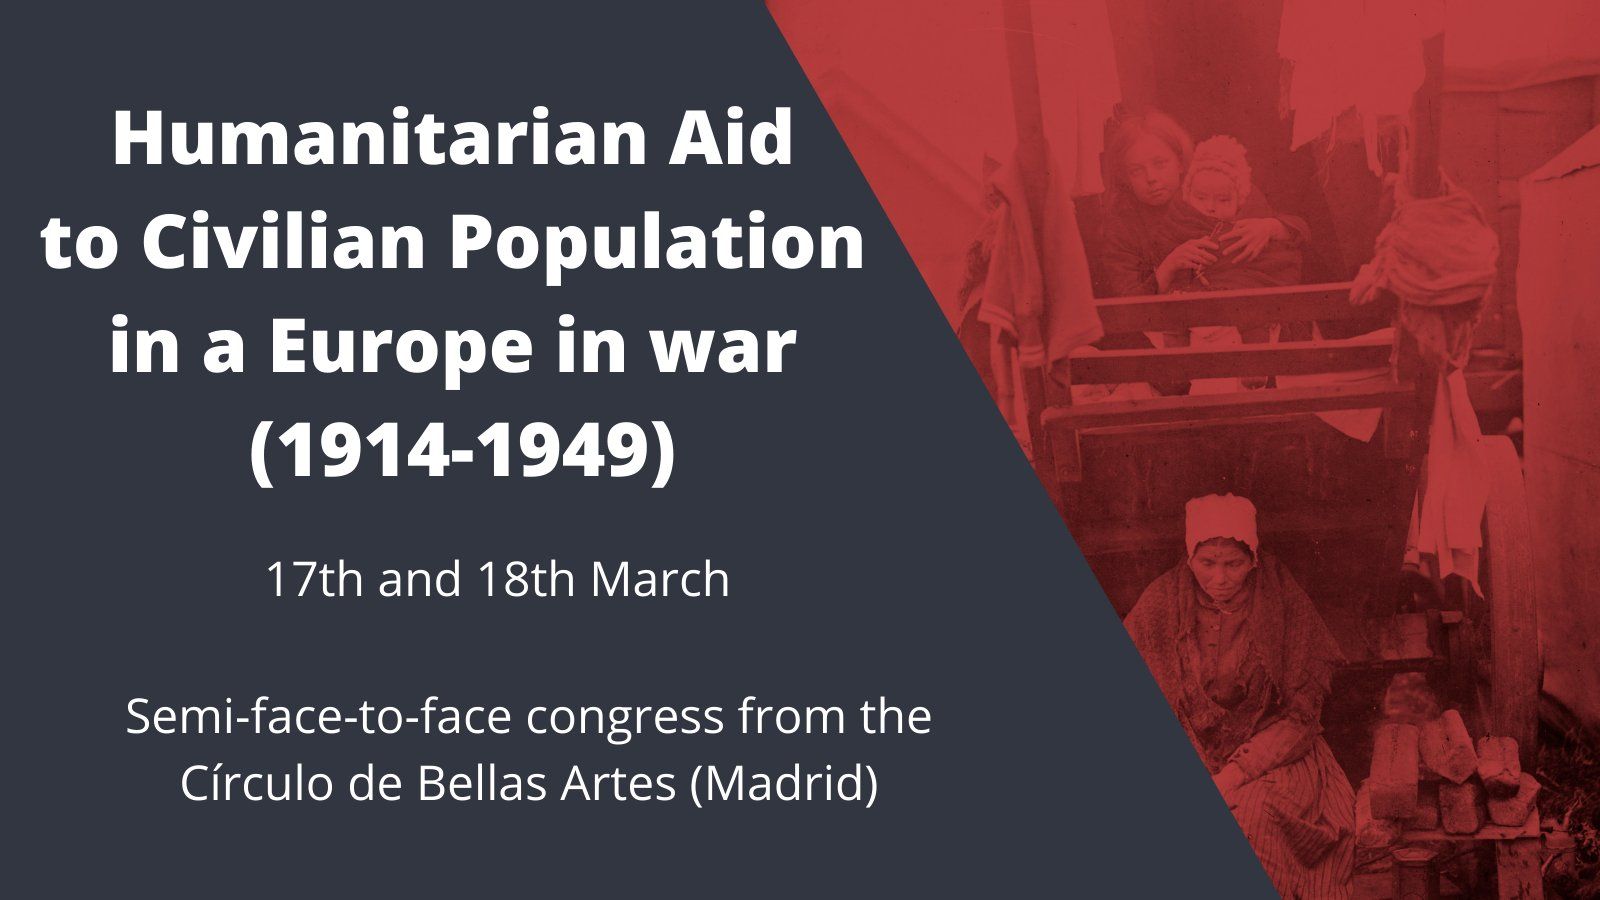 Humanitarian Aid to the Civilian Population in a Europe at War (1914-1949)